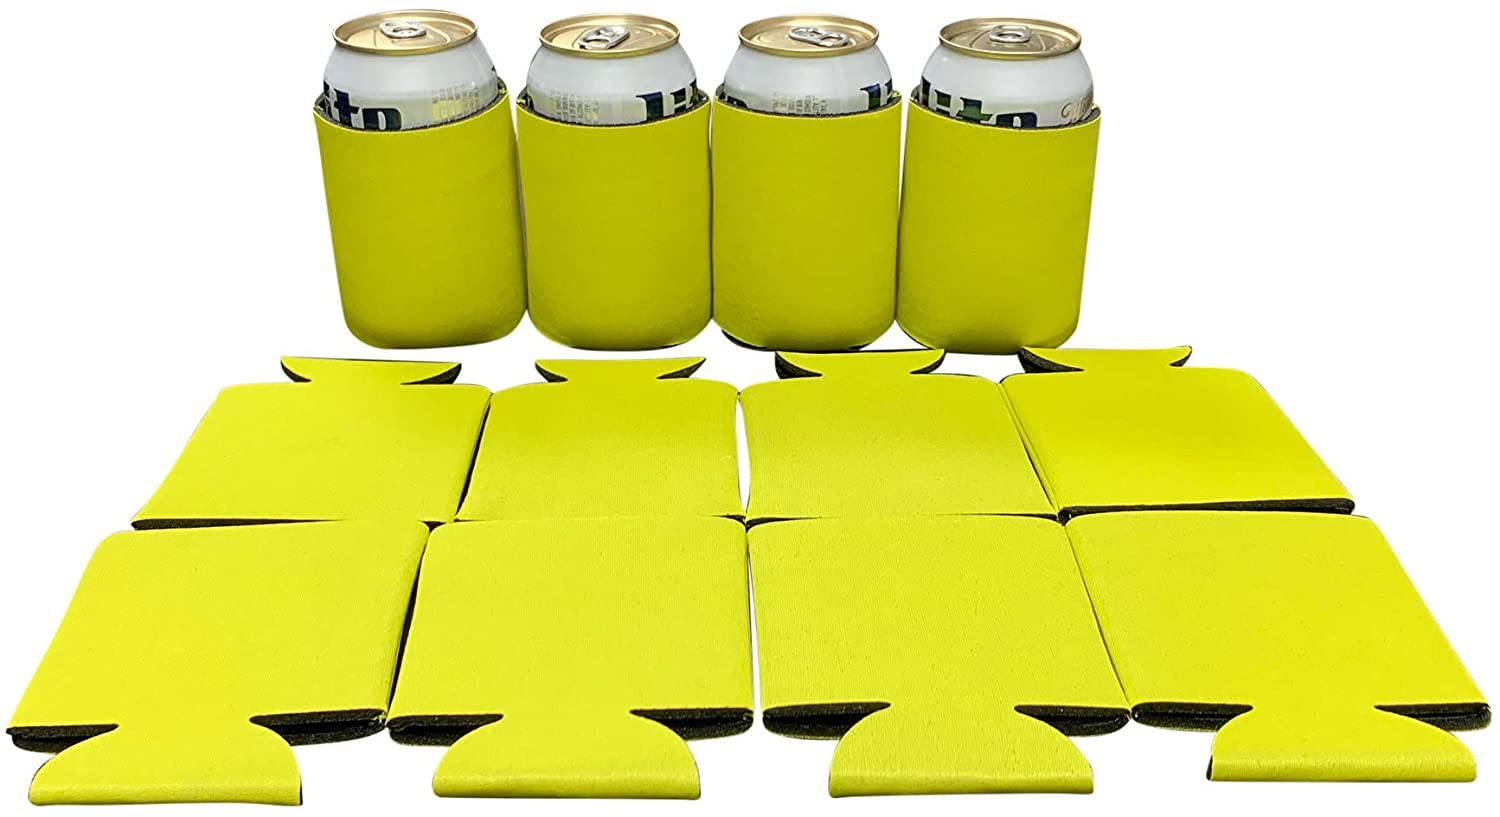 GOALONE 6Pcs/Set Beer Can Cooler Blank Neoprene Can Sleeves